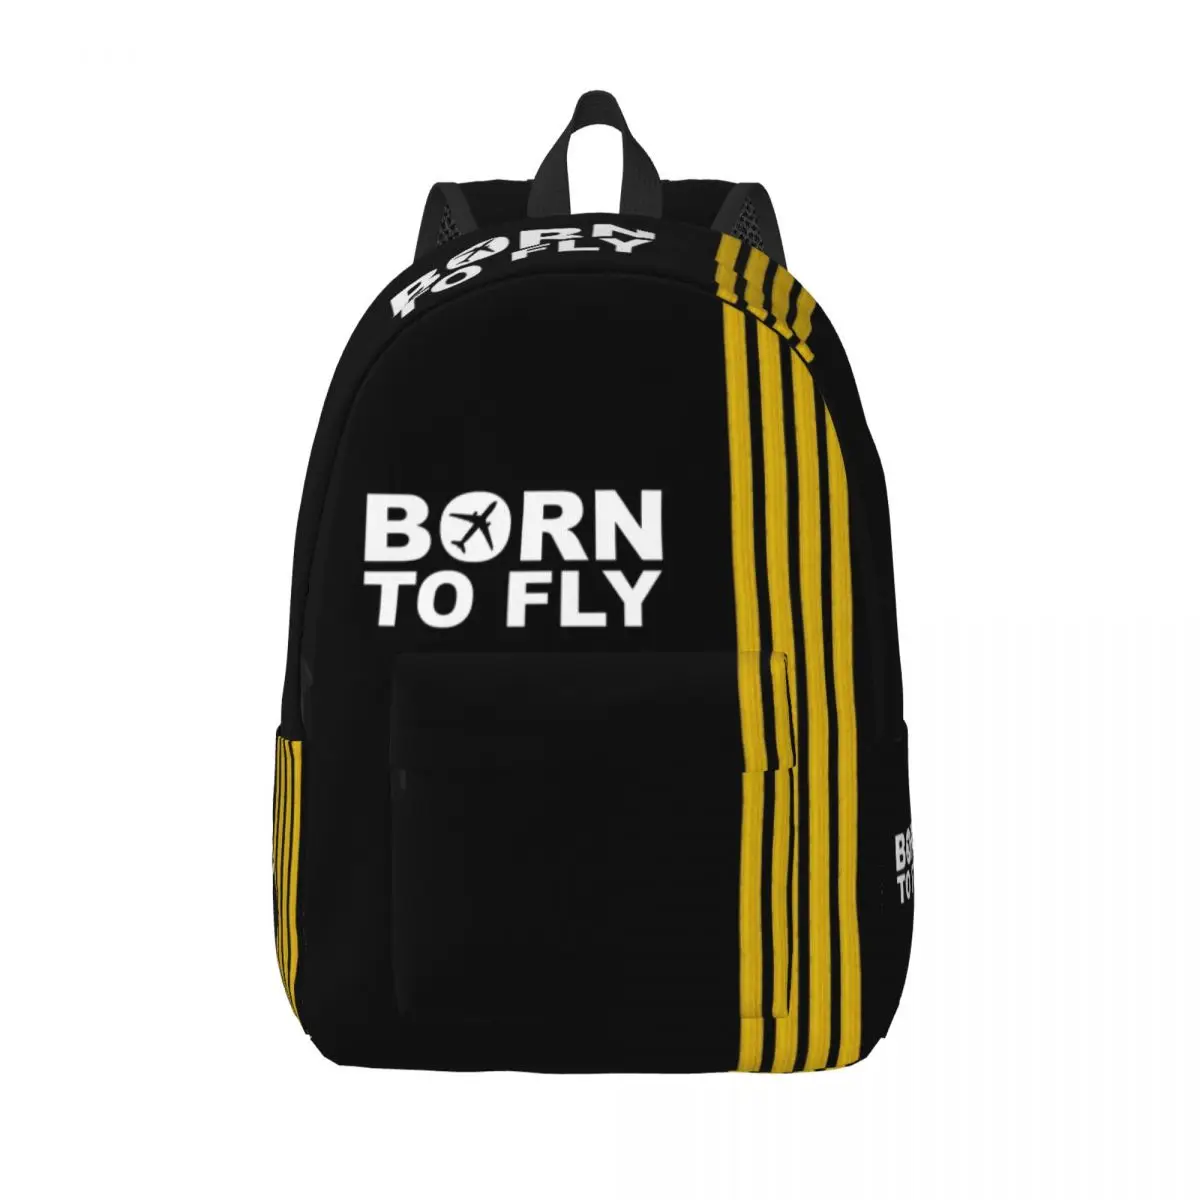 

Born To Fly Captain Stripes Flight Pilot Travel Canvas Backpack School Computer Bookbag Aviation Airplane College Daypack Bags